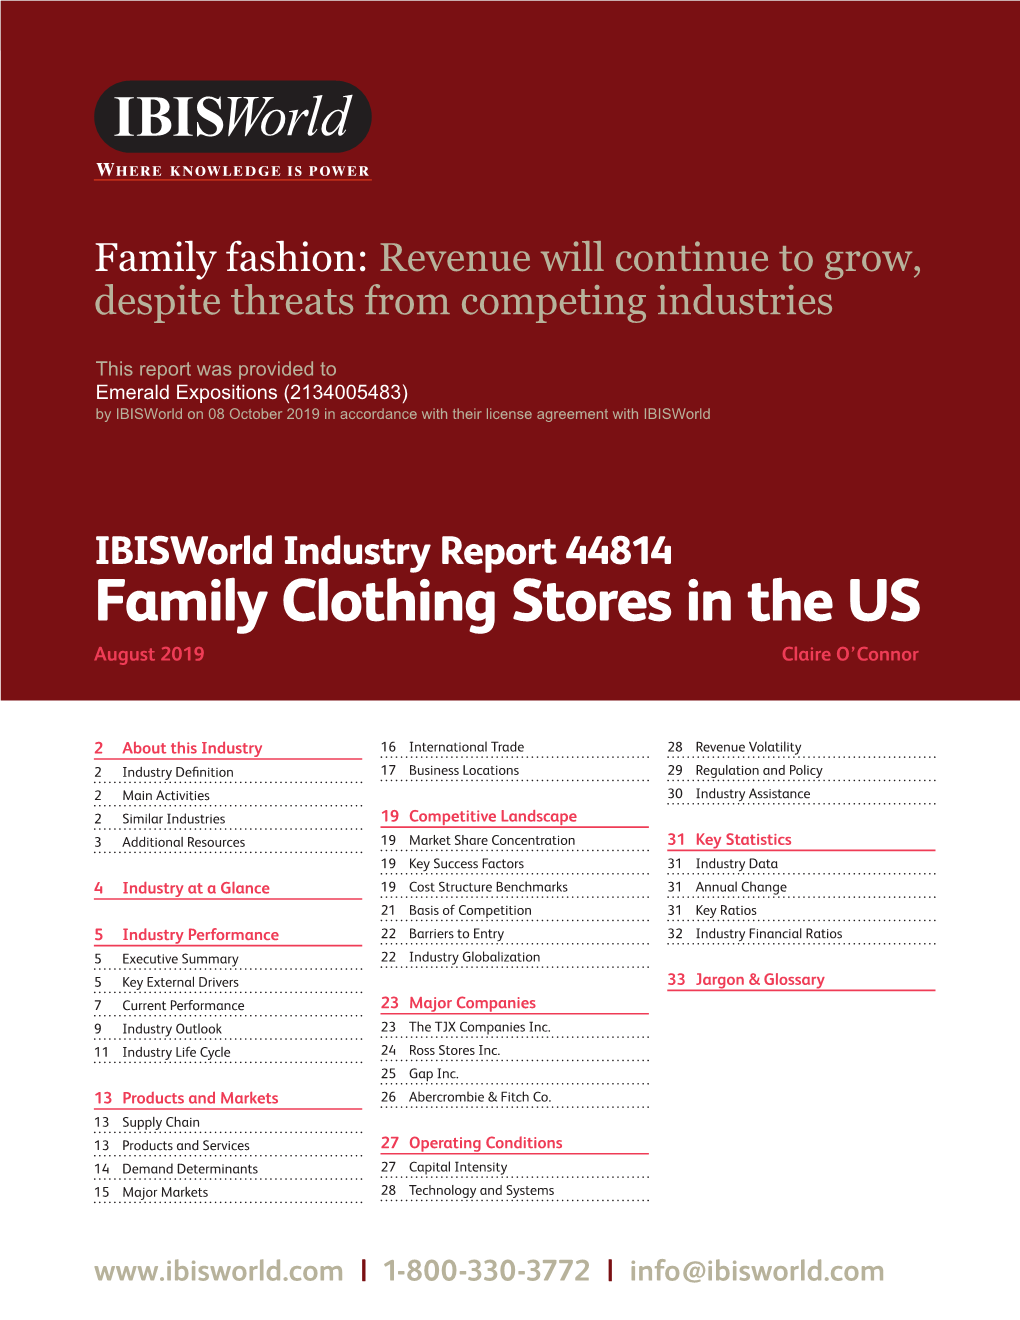 Family Clothing Stores in the US August 2019 1